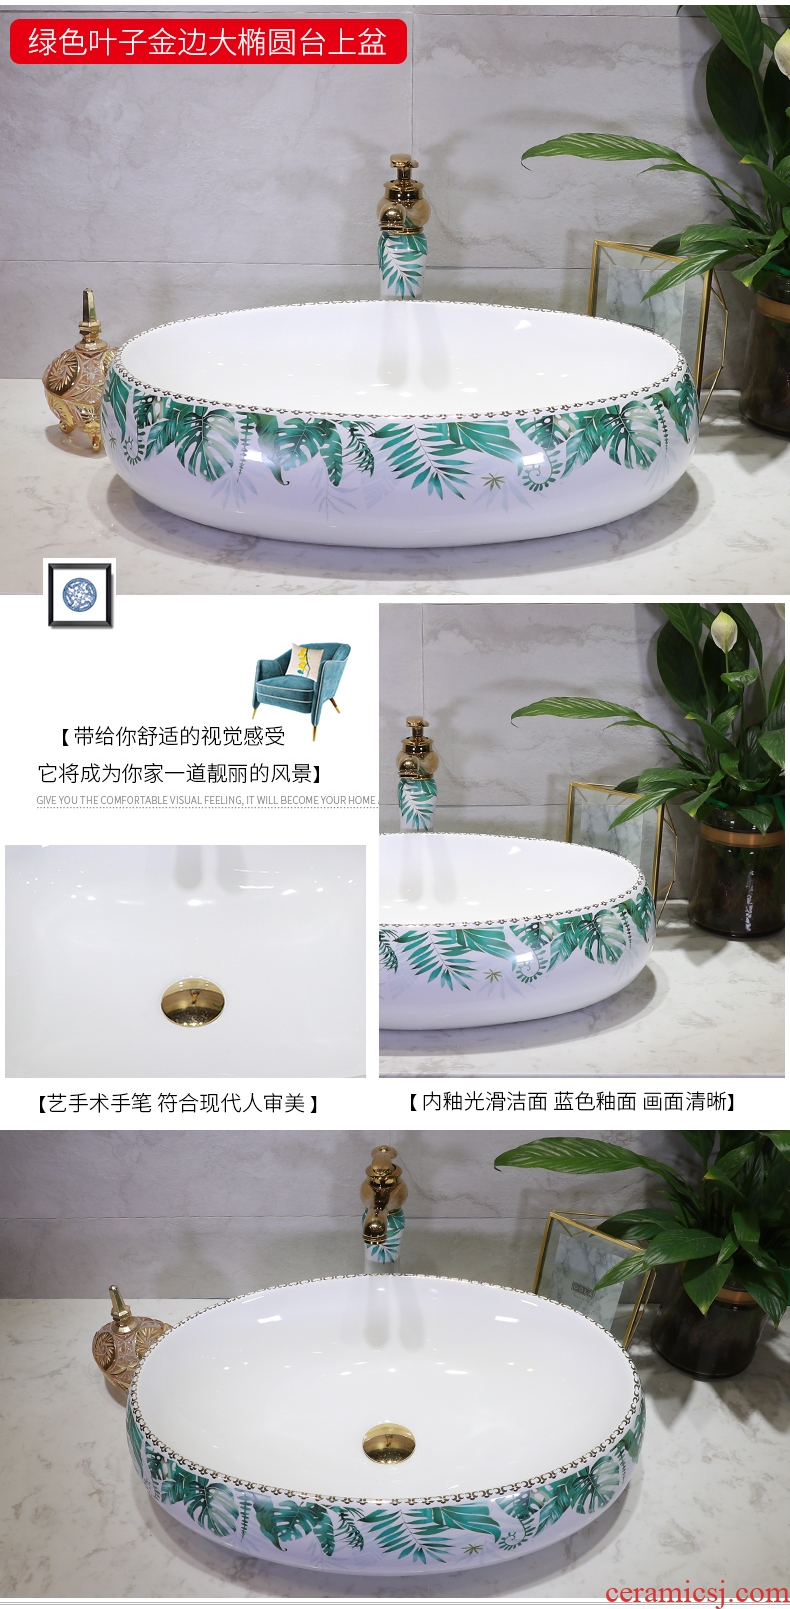 Koh larn, qi ceramic stage basin sinks square household stage basin to the balcony sink single European toilet